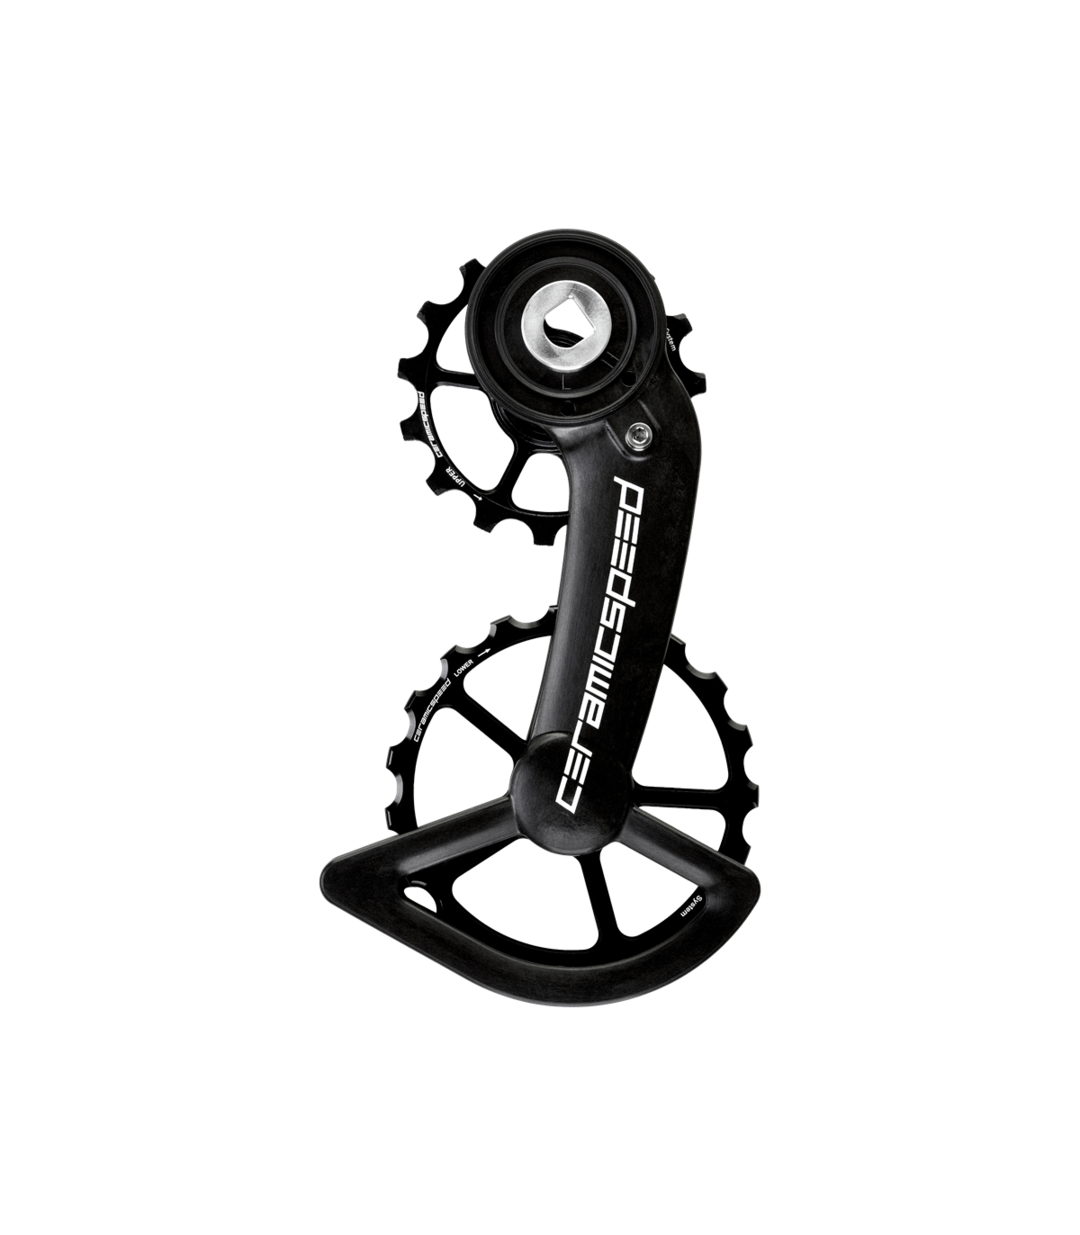 CERAMICSPEED Oversized Pulley Sram Axs Red/Force - Black